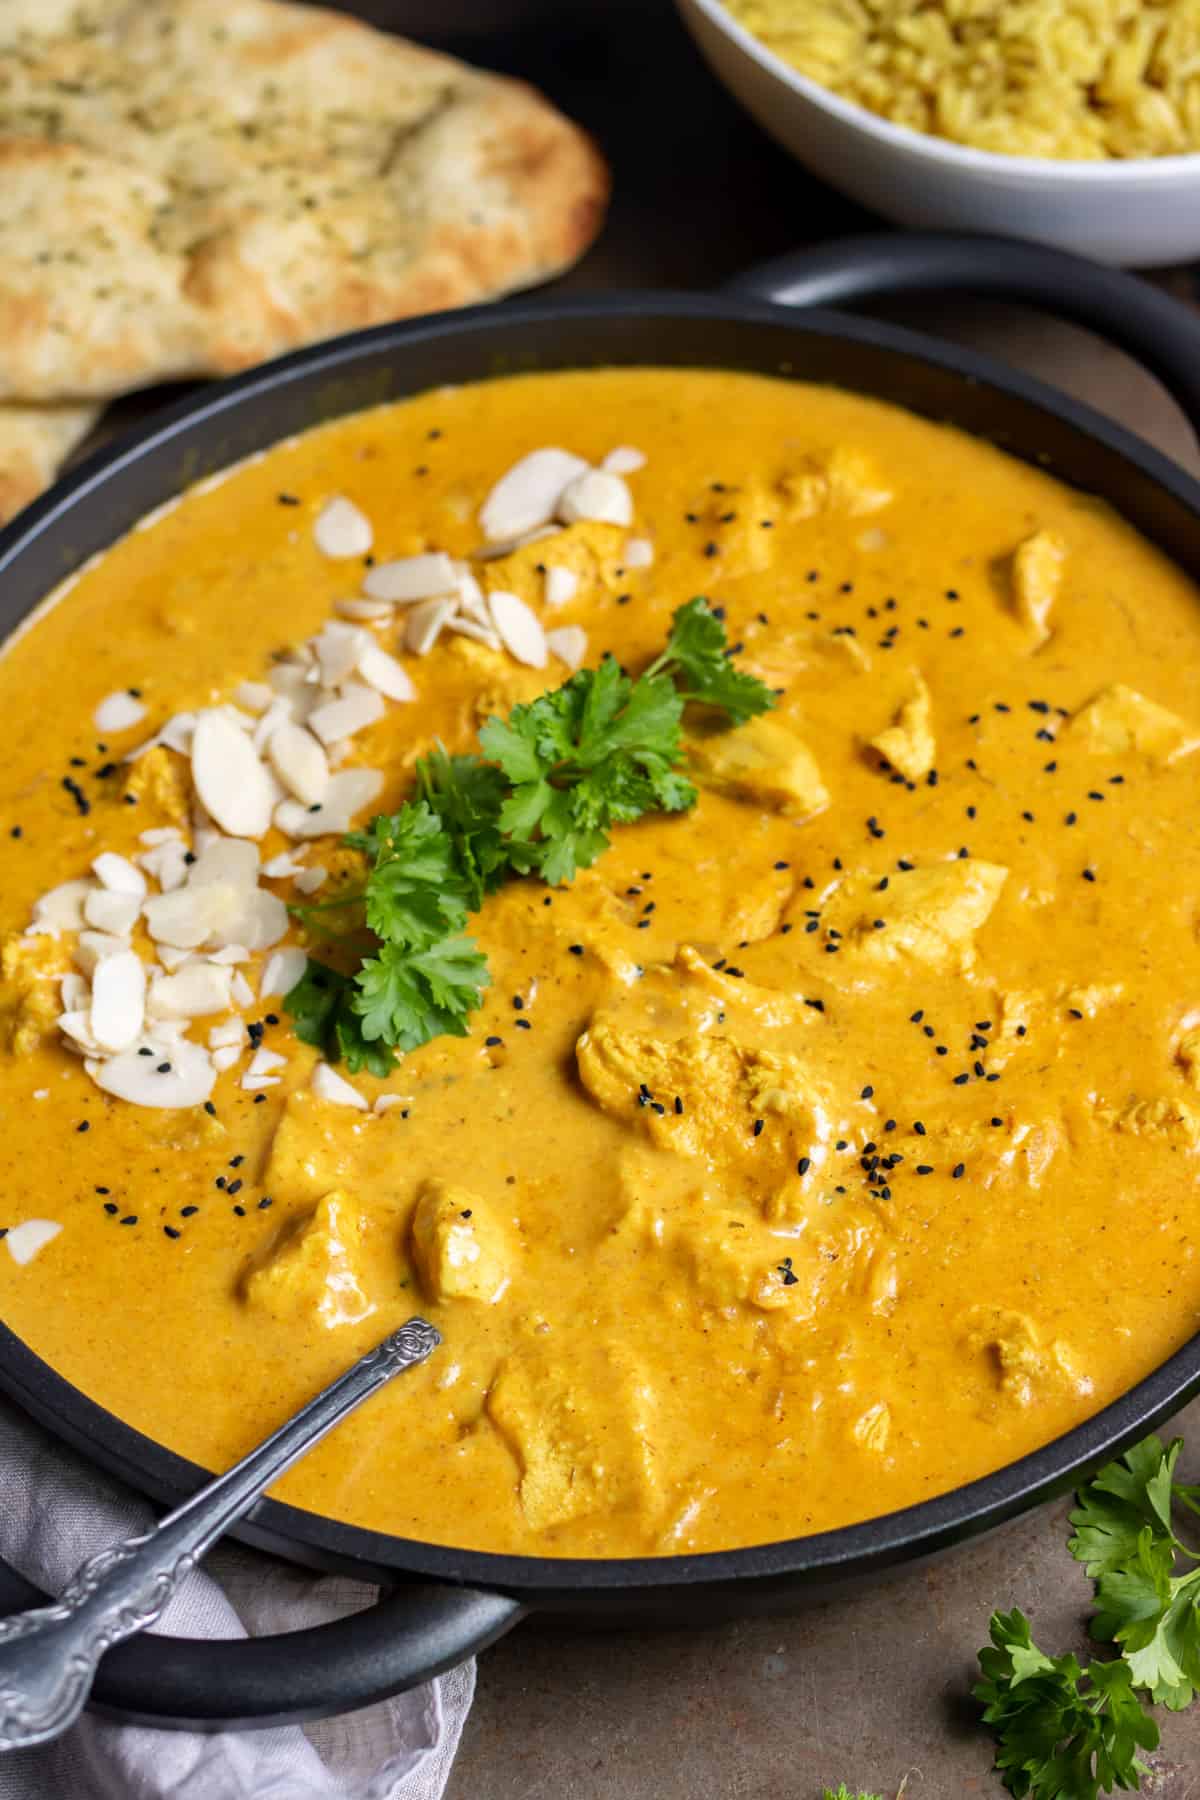 Spoon in a serving dish of slow cooker chicken korma.